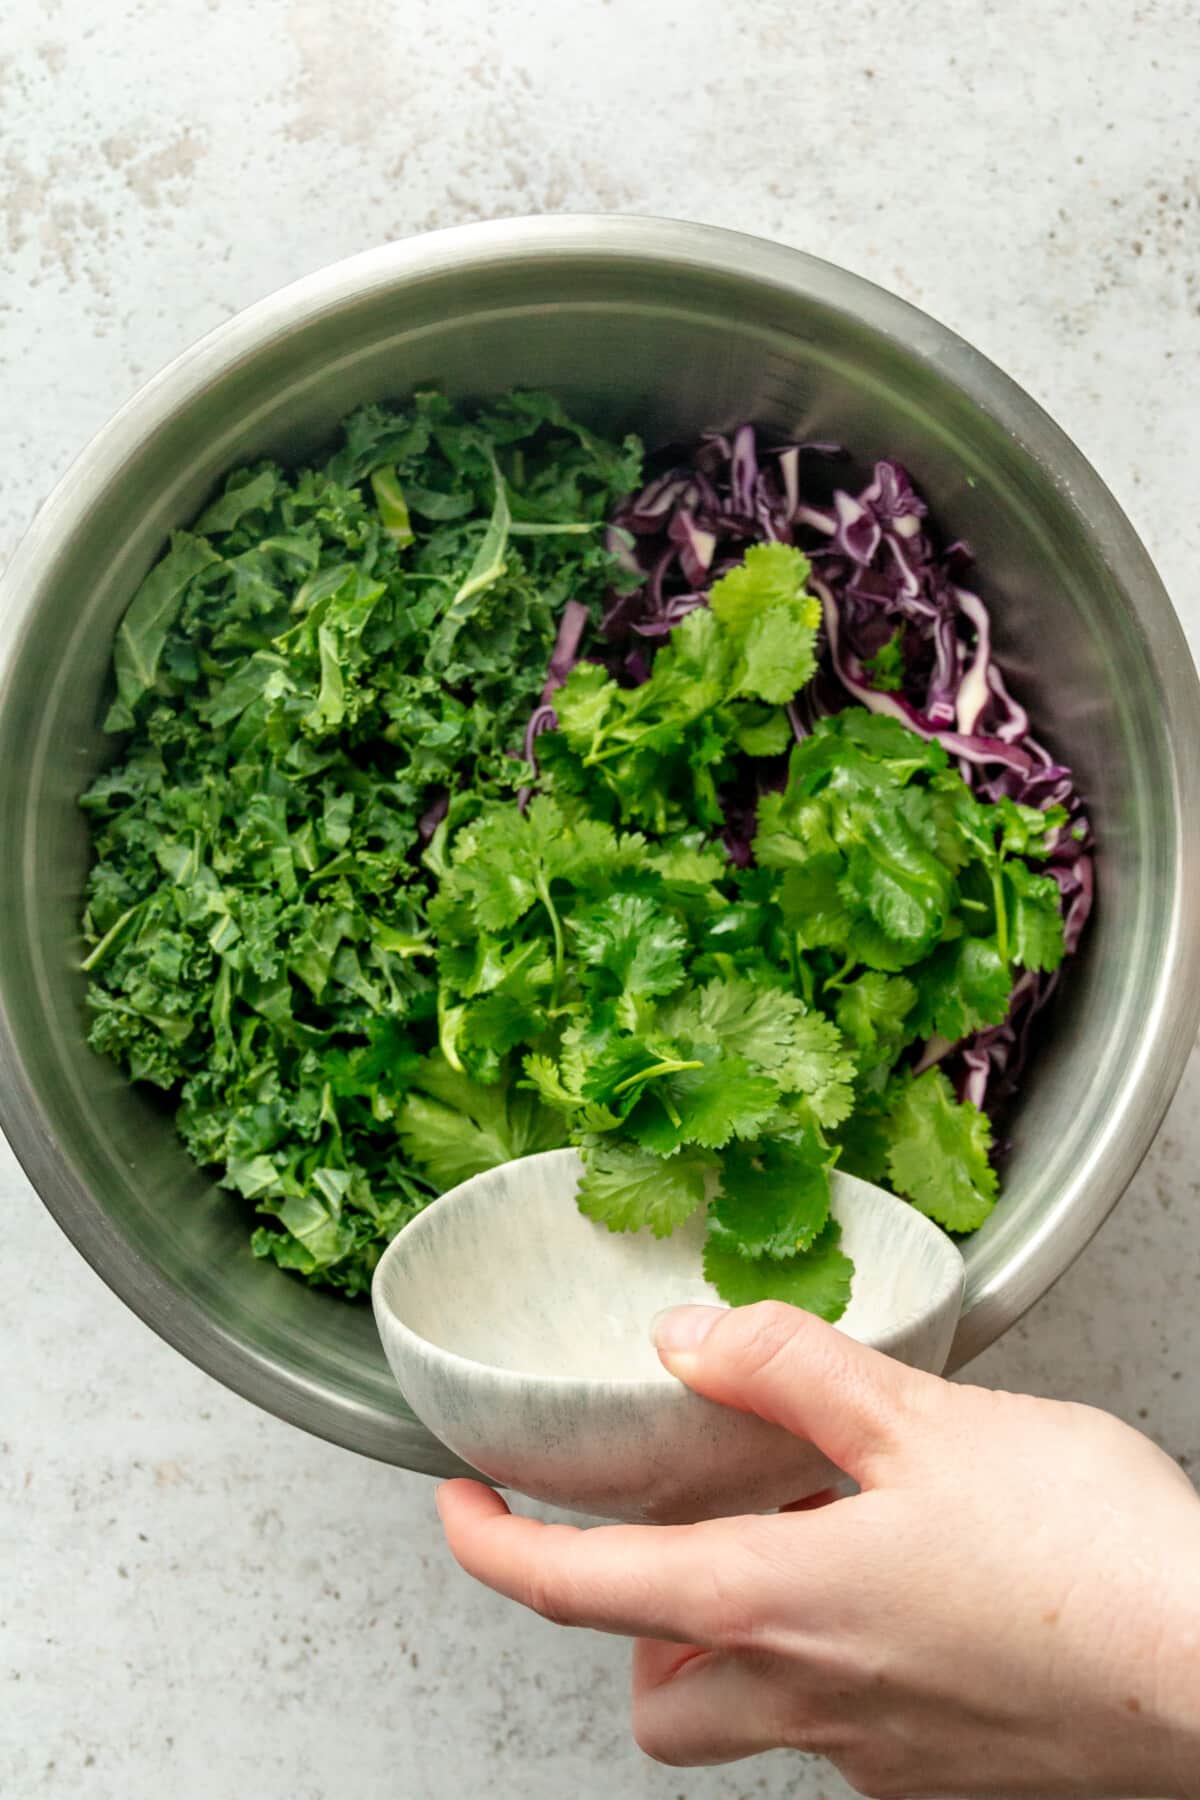 Coriander leaves are tossed into a large stainless steel bowl alongside chopped kale and red cabbage on a light grey surface.